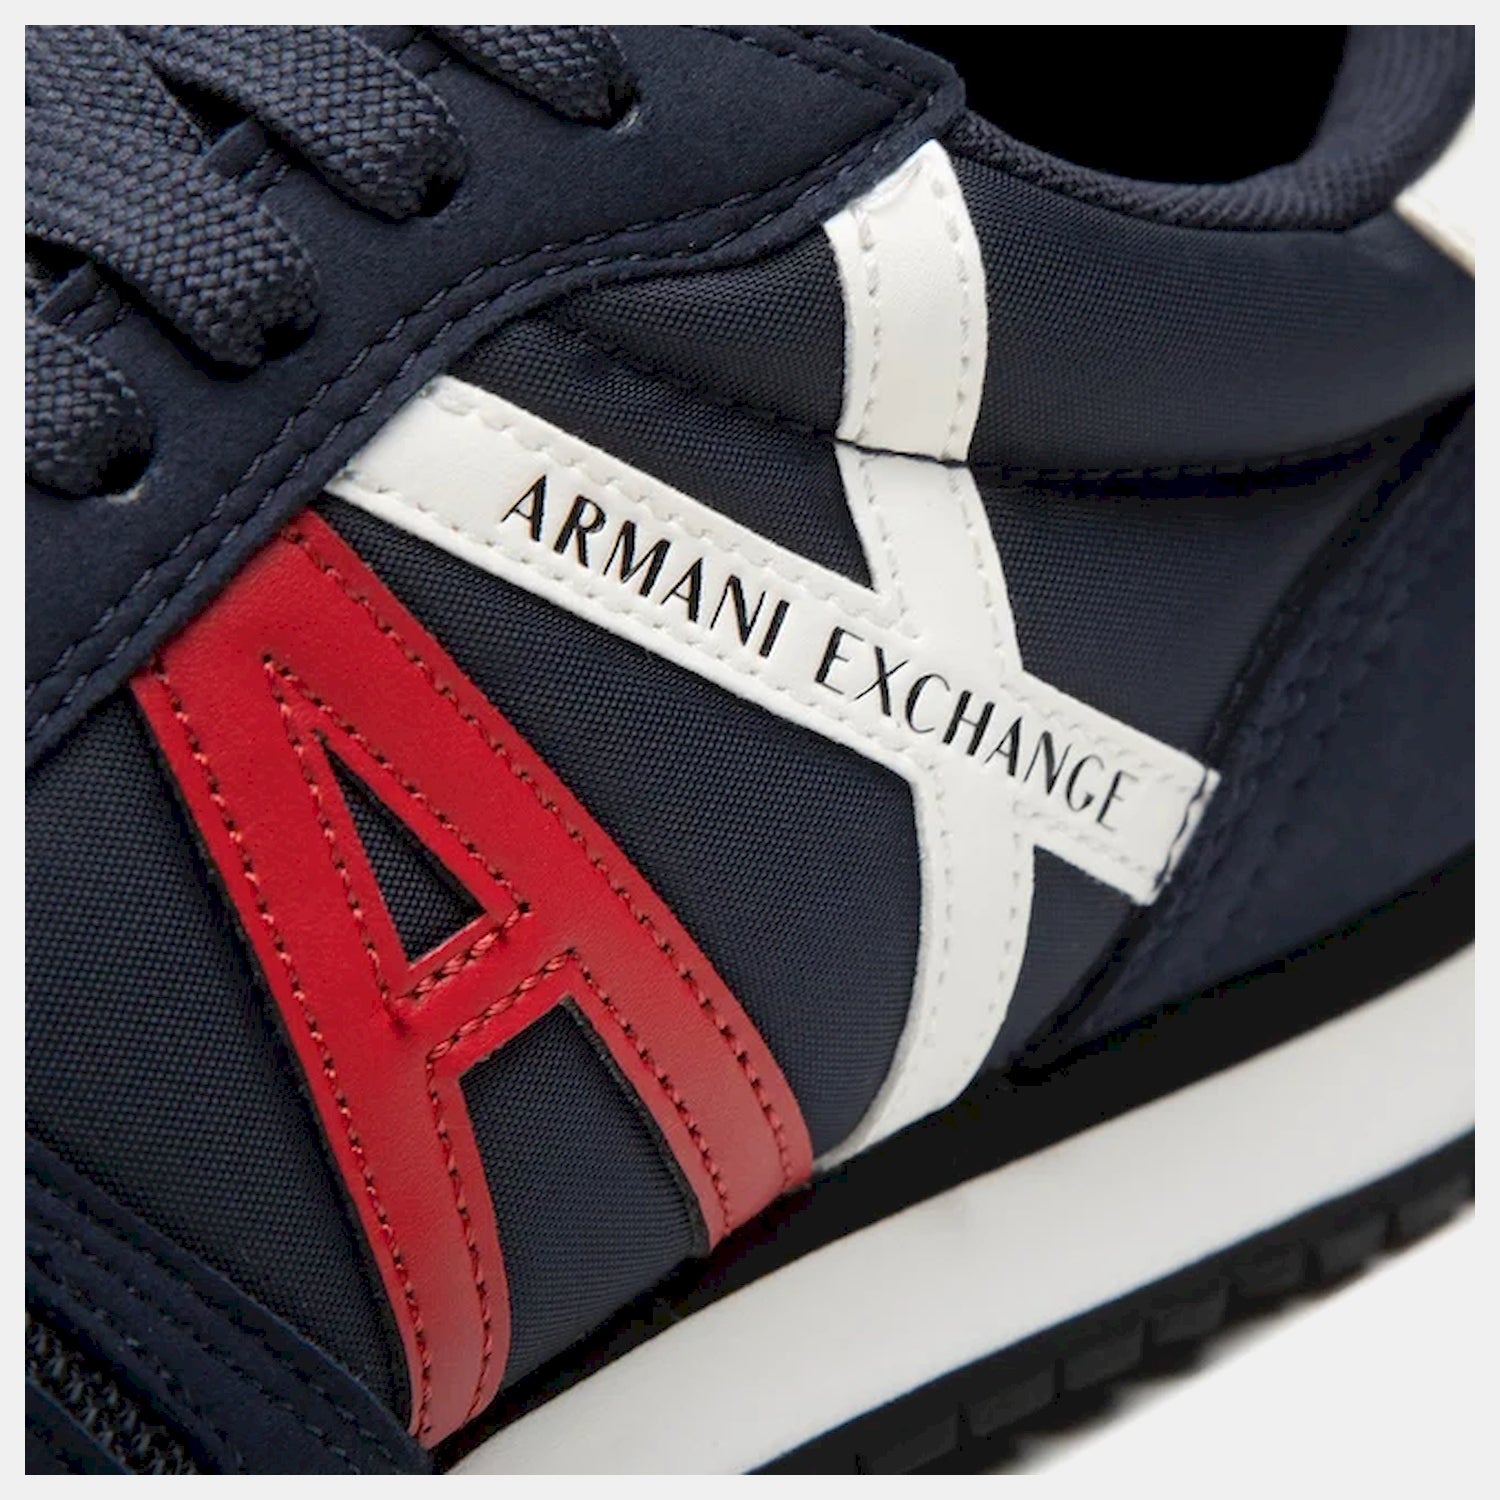 Armani Exchange Sapatilhas Sneakers Shoes Xux017 Xv028 Navy Red Navy Vermelho_shot4